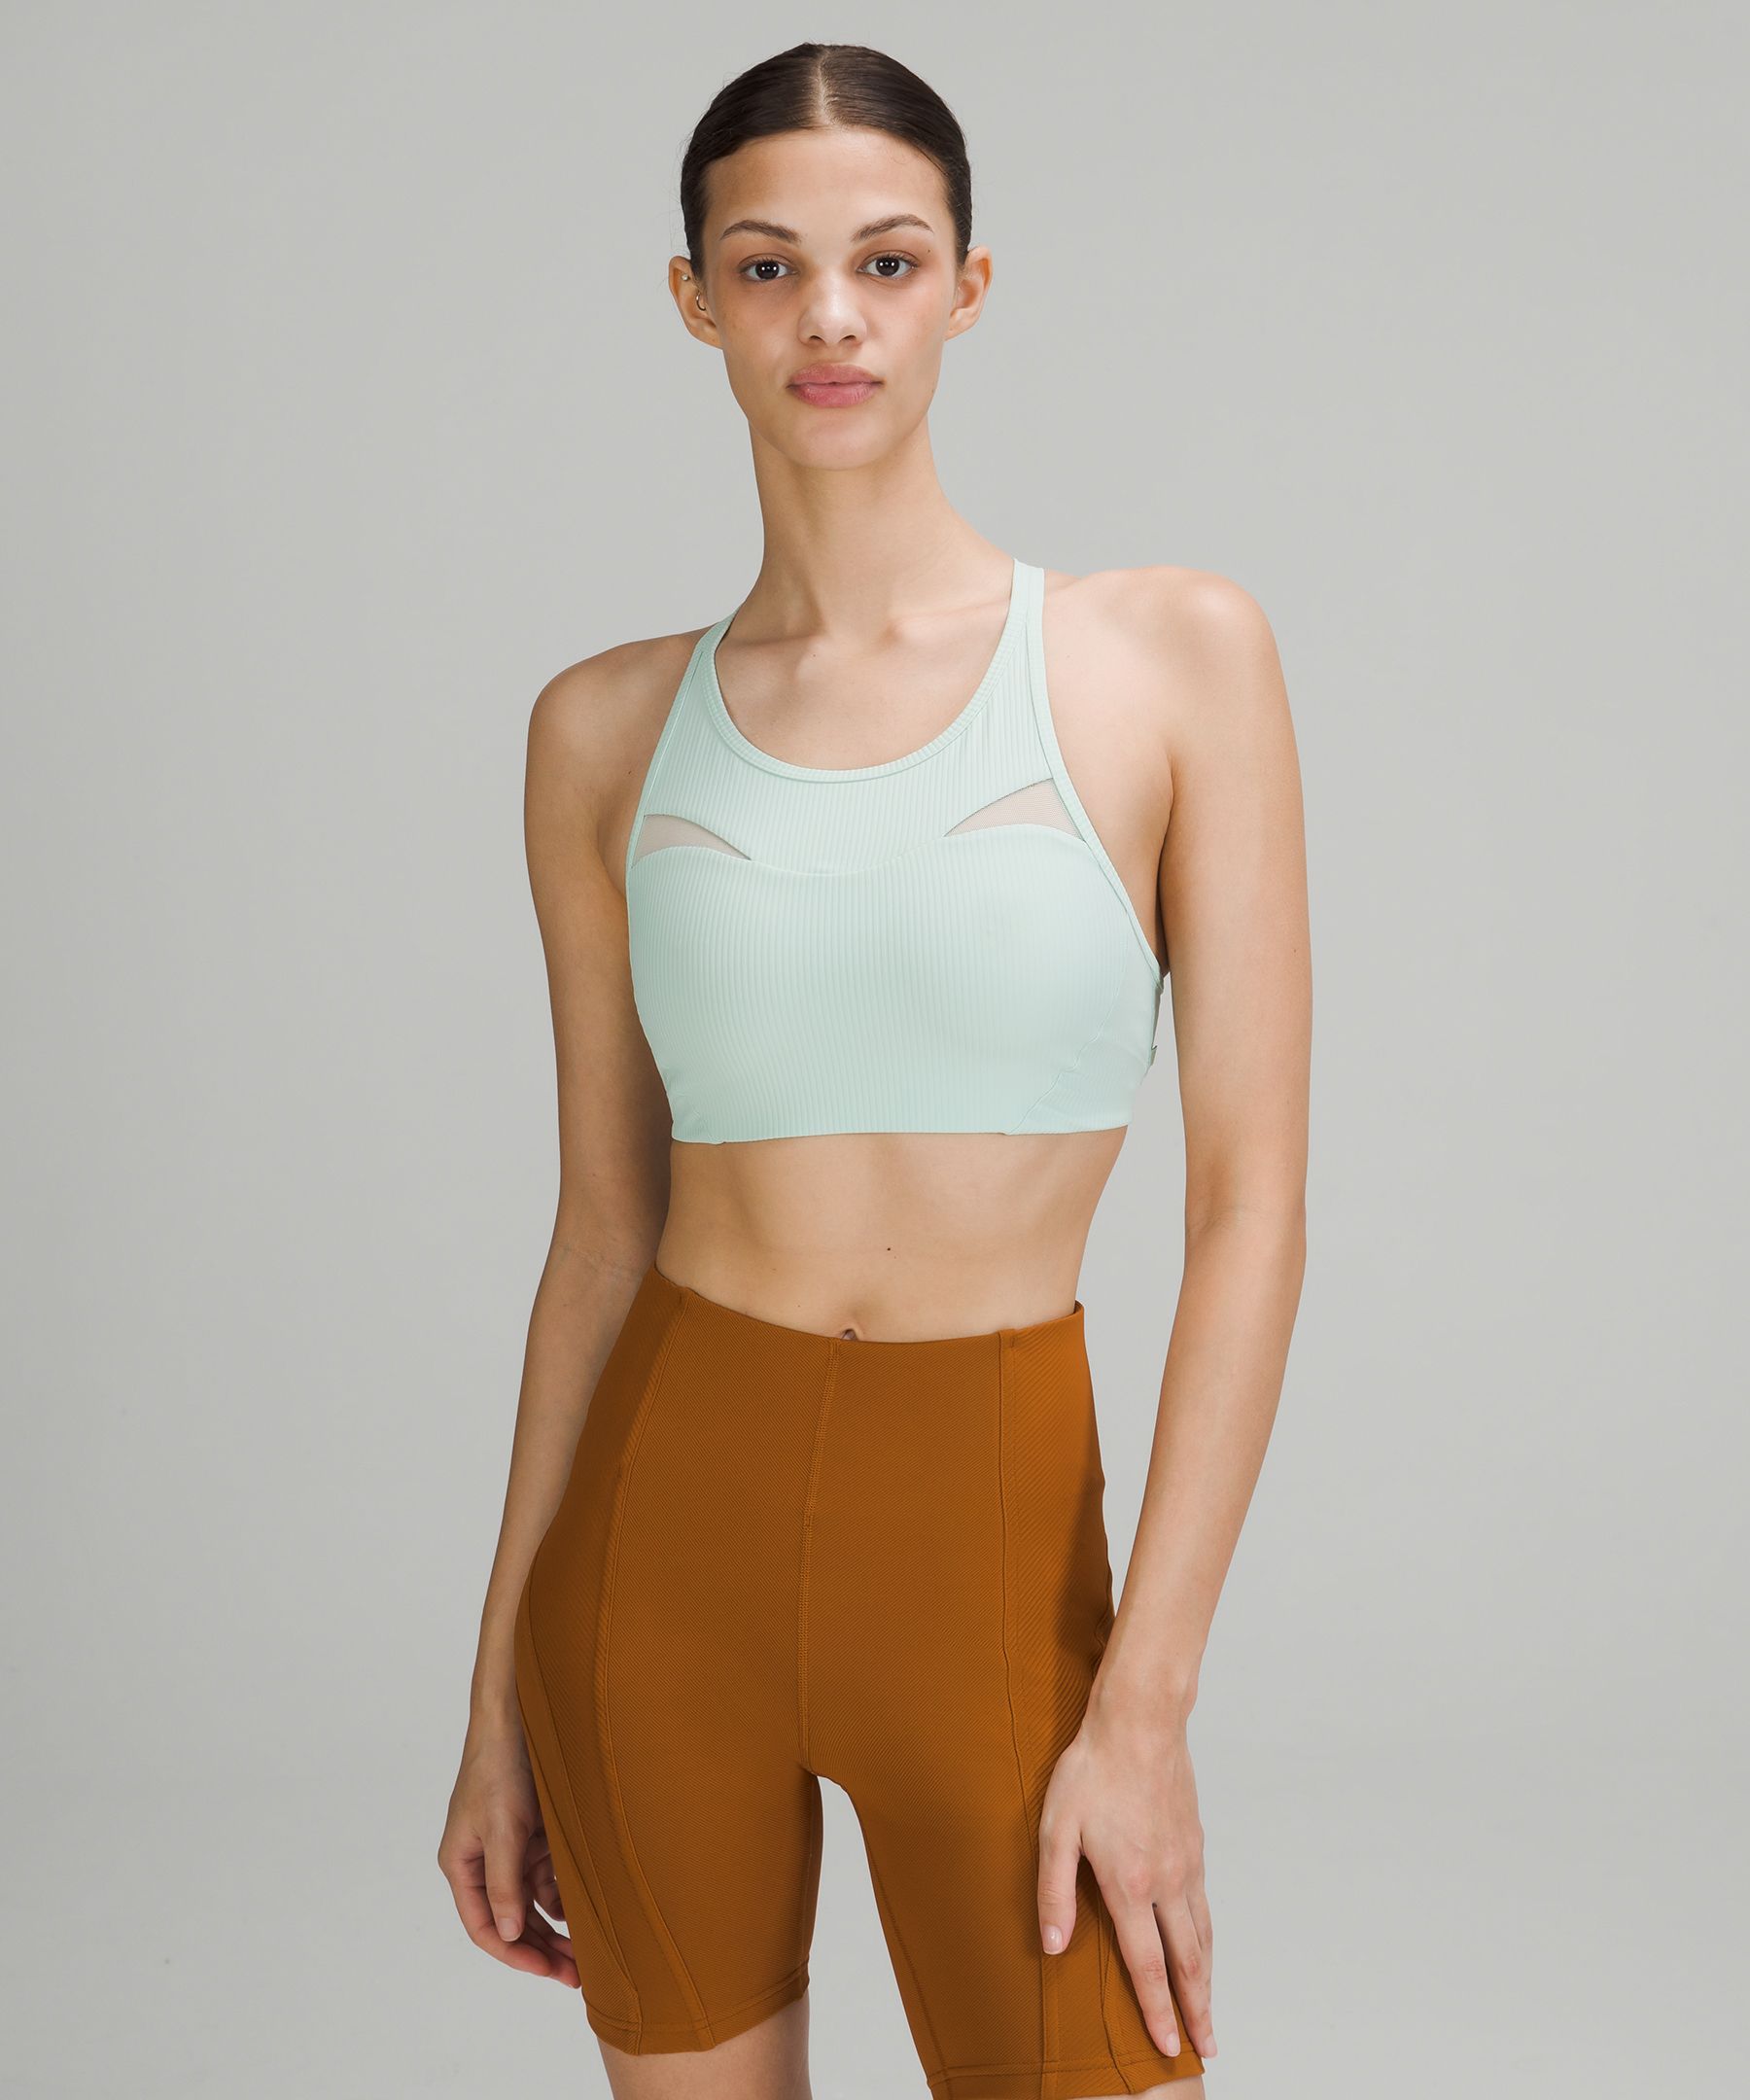 Race Pace *High Neck Sports Bra – EASY ACTIVE